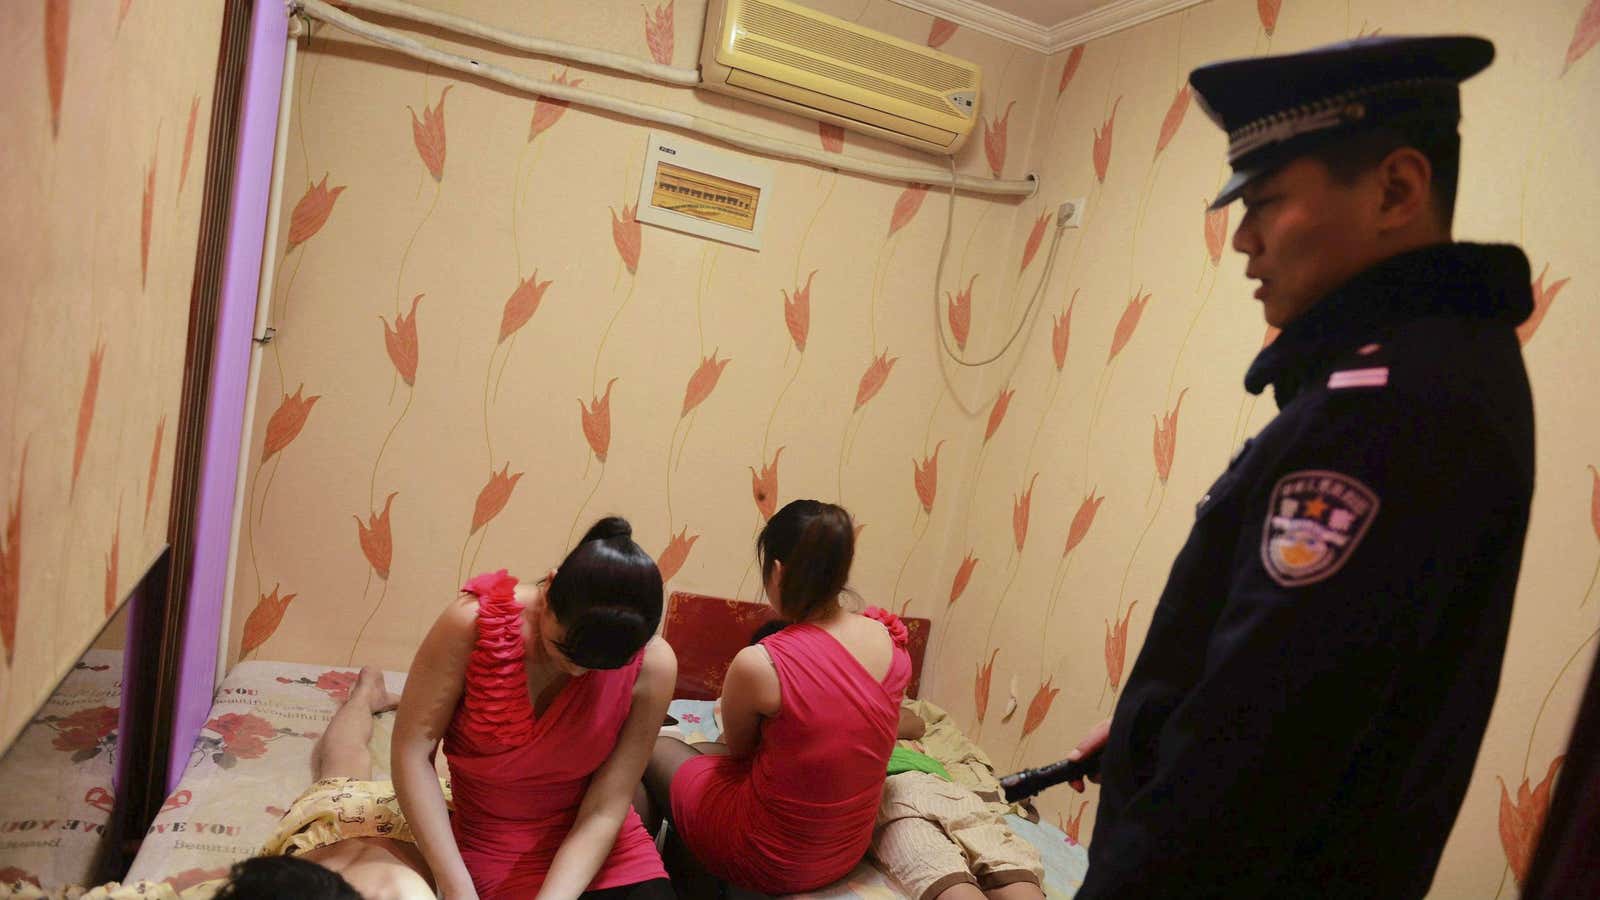 Police inspect a massage parlor in Shandong province.